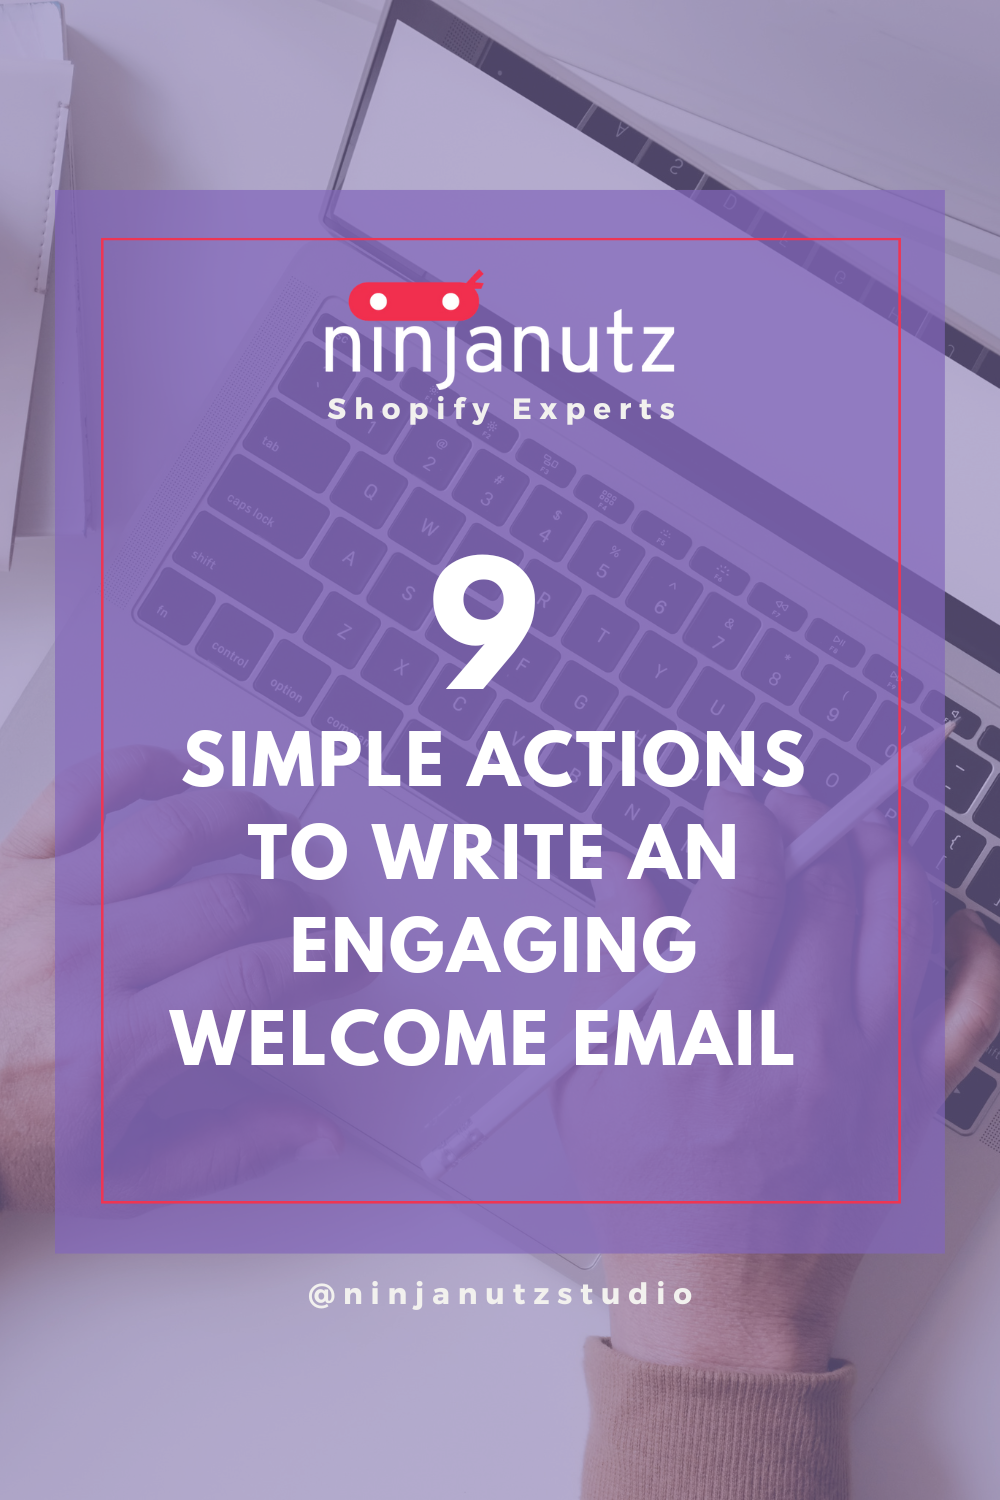 9 simple actions for how to write a welcome email NinjaNutz®